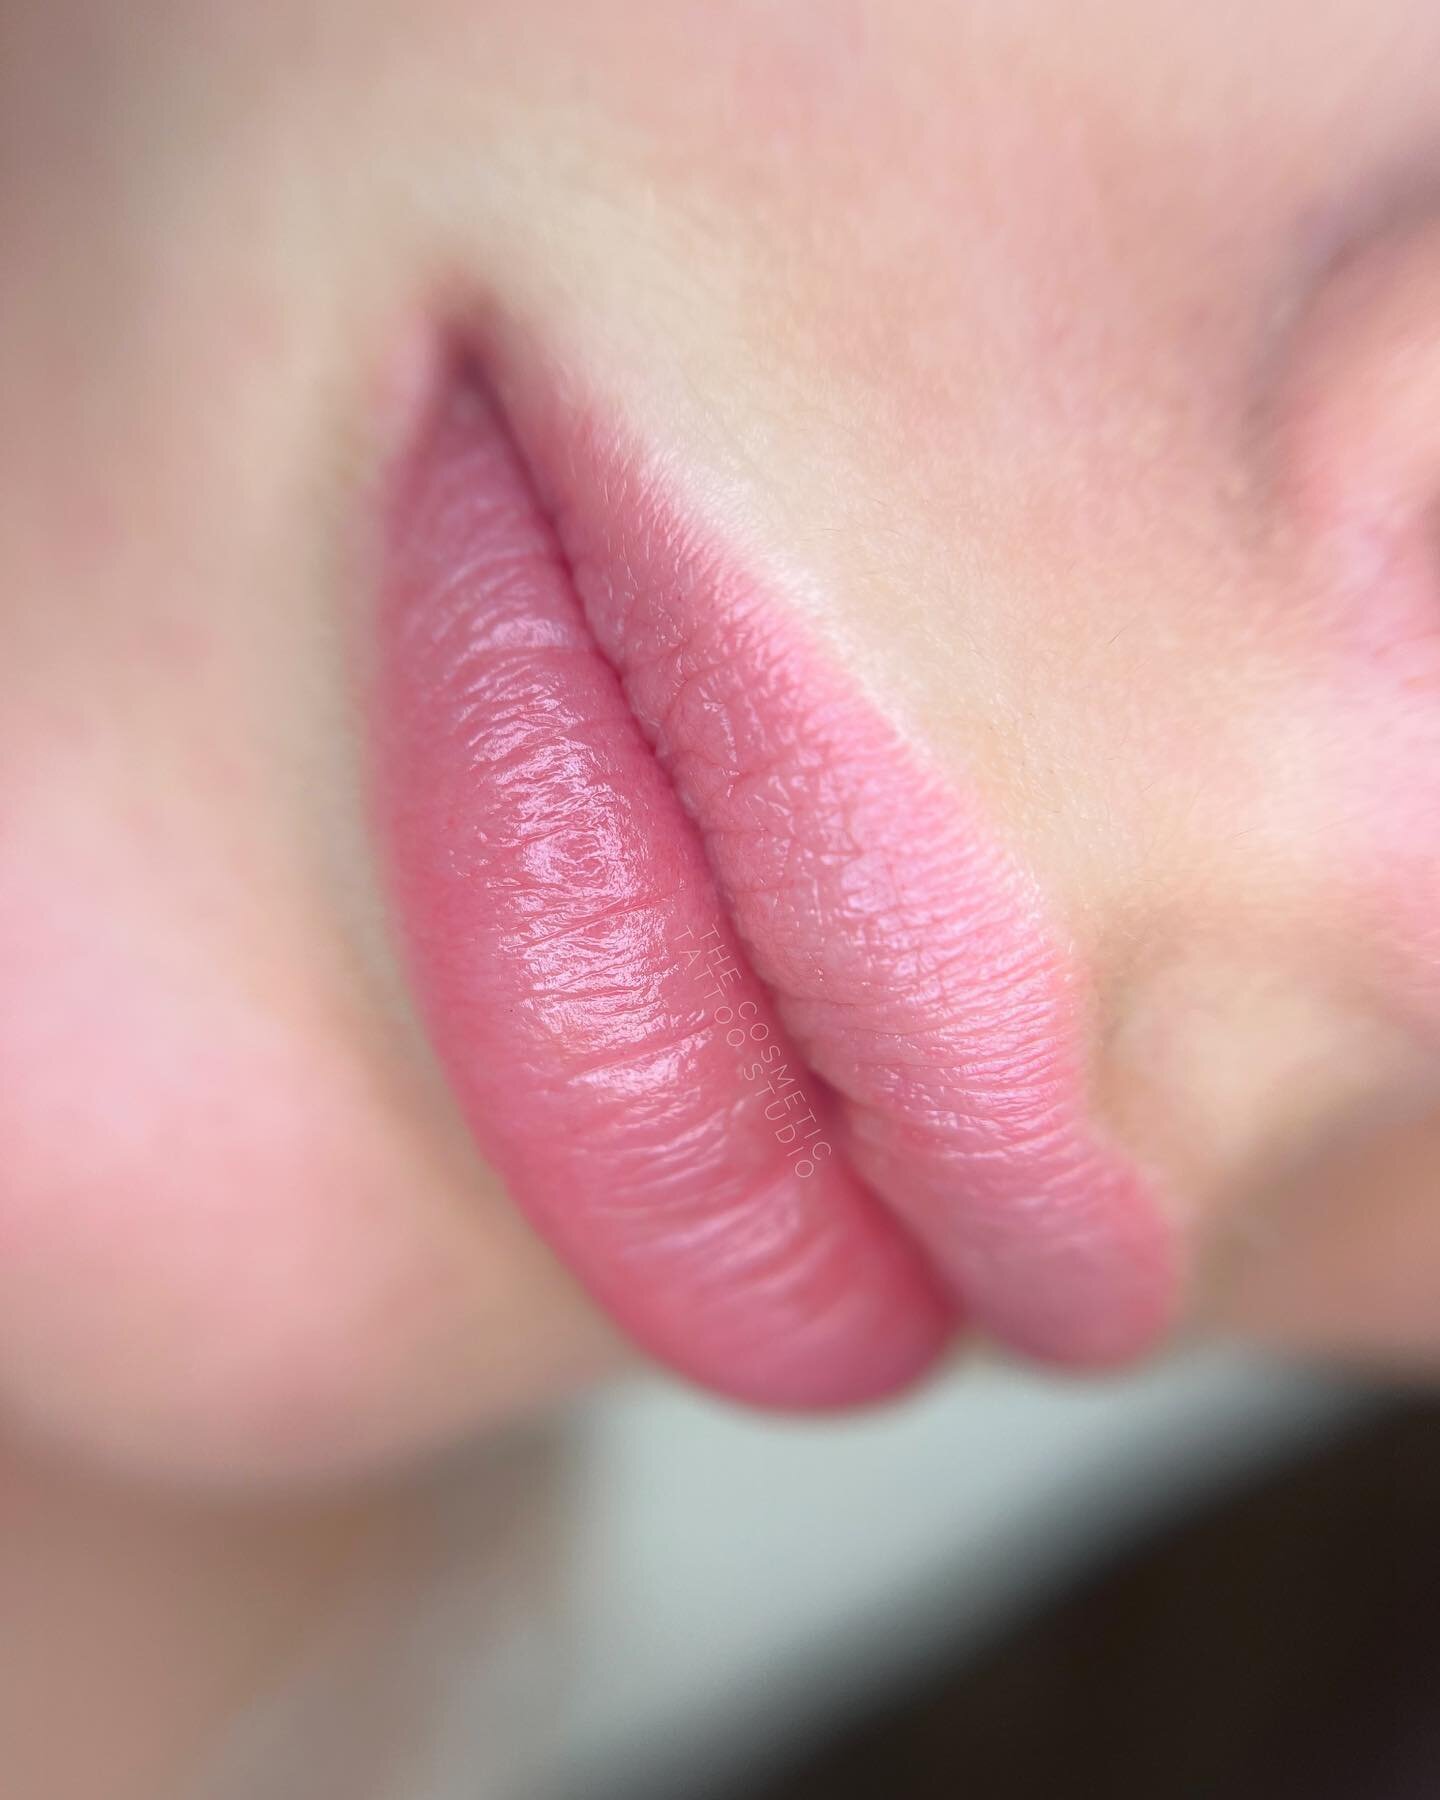 HEALED soft pink lip blush tattoo 🌸 after 1 session, before touch up. 

Artist: Bodi

My client naturally has beautiful full lips!  Her lip colour is naturally quite pale so we did a lovely soft lip blush tattoo for her in a light colour to enhance 